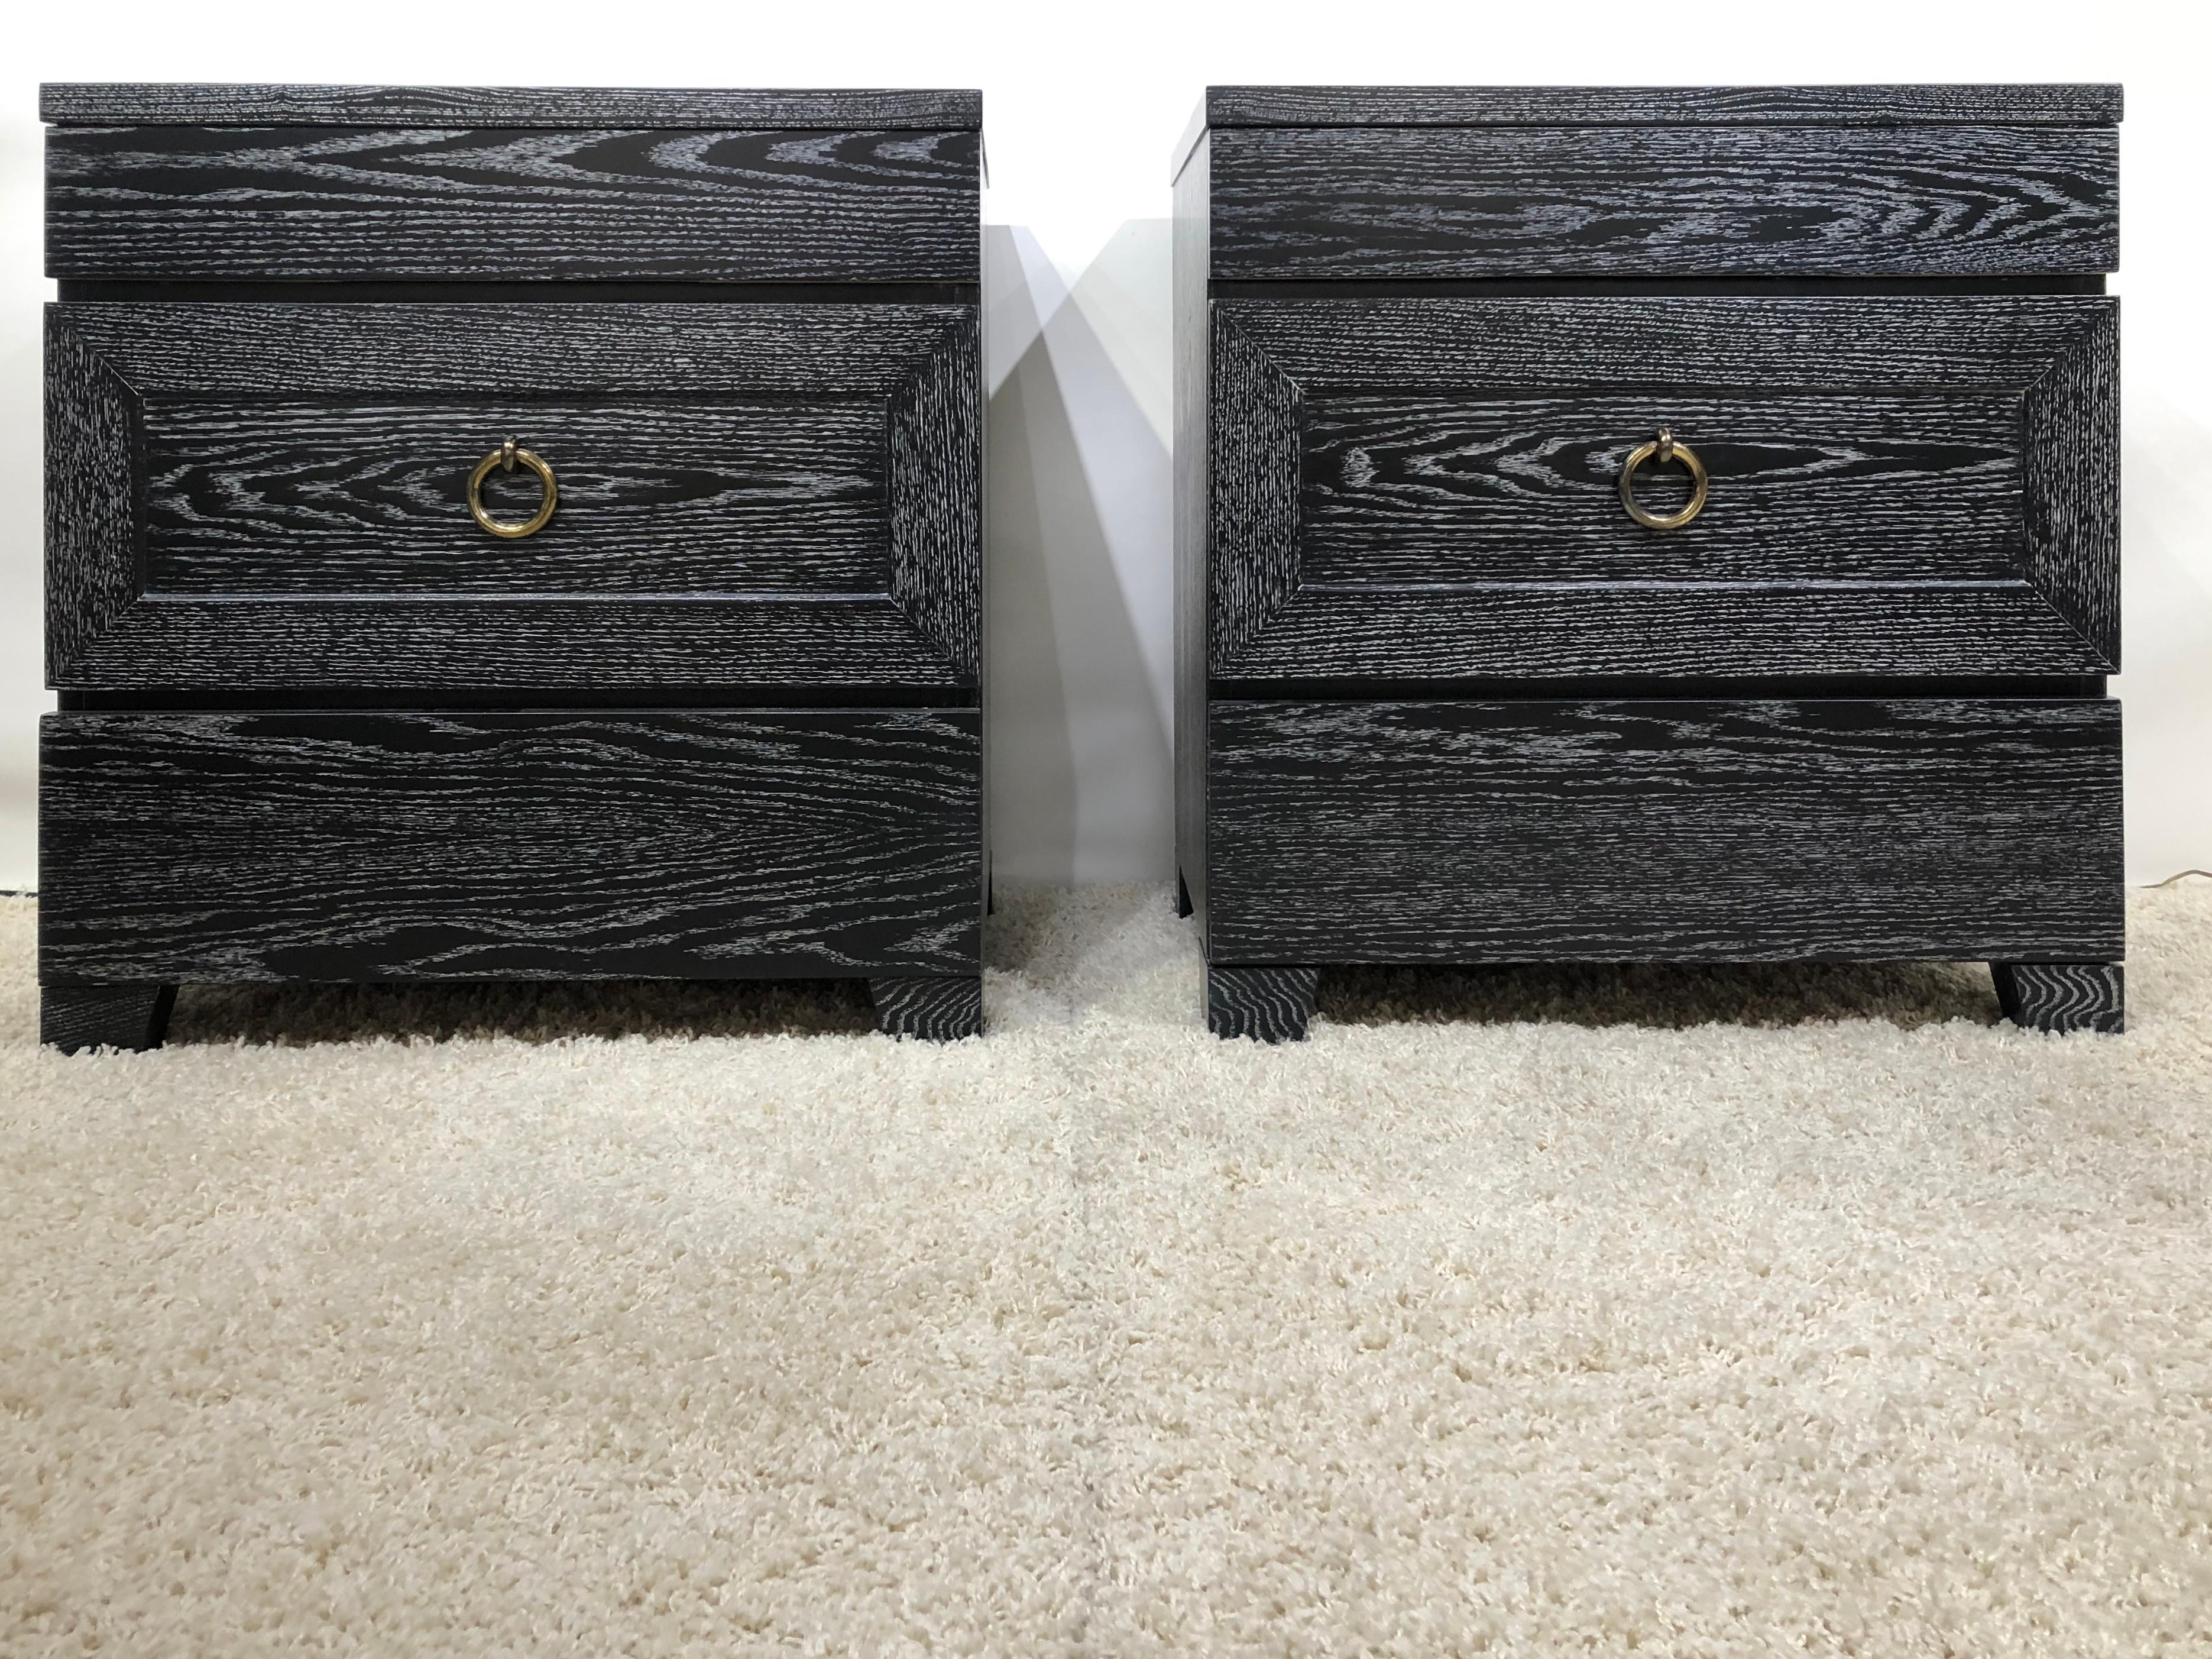 Pair of oak cerused James Mont petite three-drawer chest / nightstand cabinets with original bronze finish ring.
   